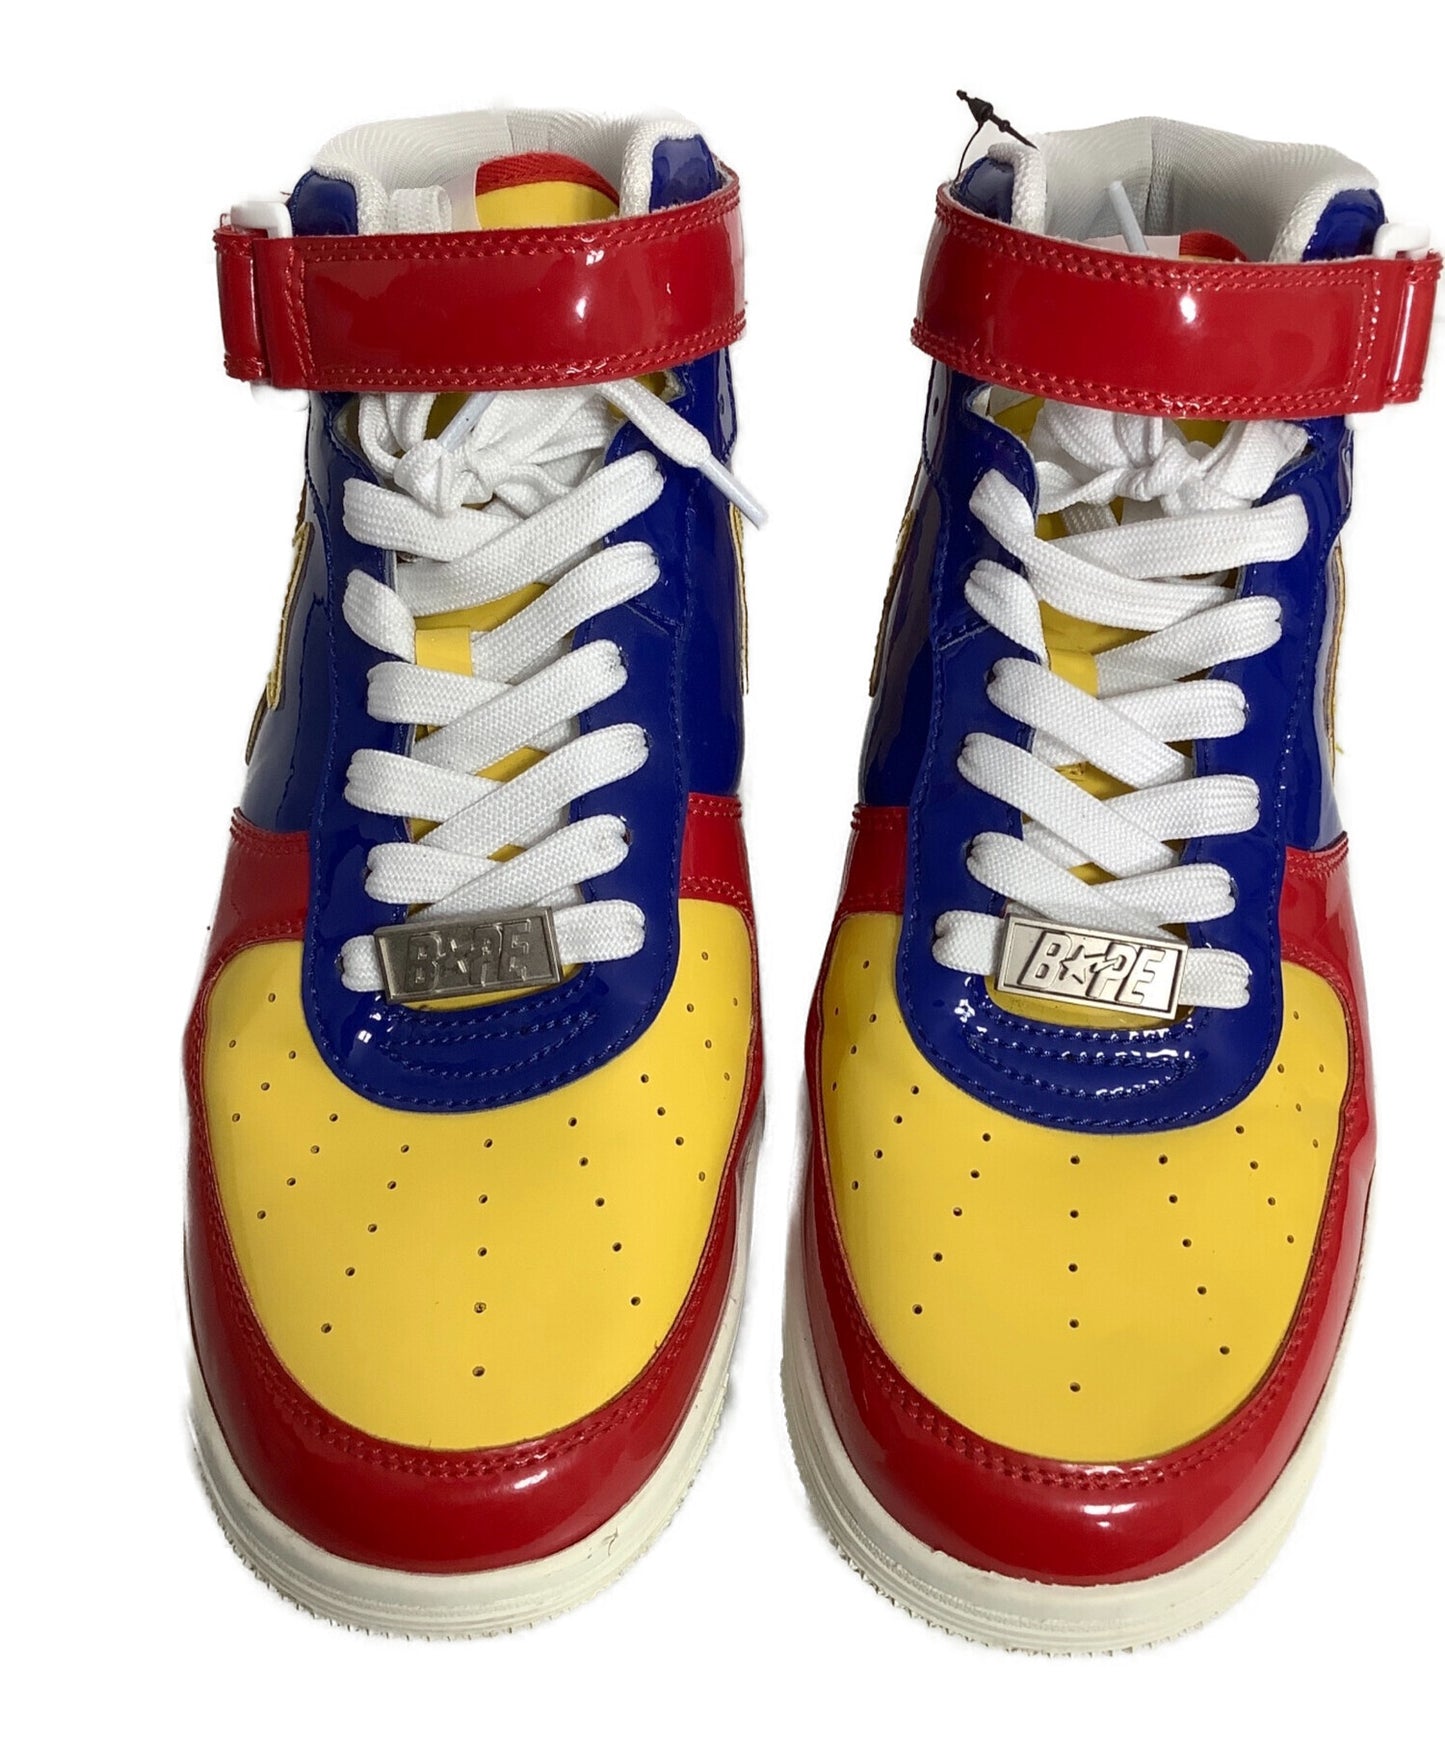 [Pre-owned] A BATHING APE BAPESTA mid-cut sneakers